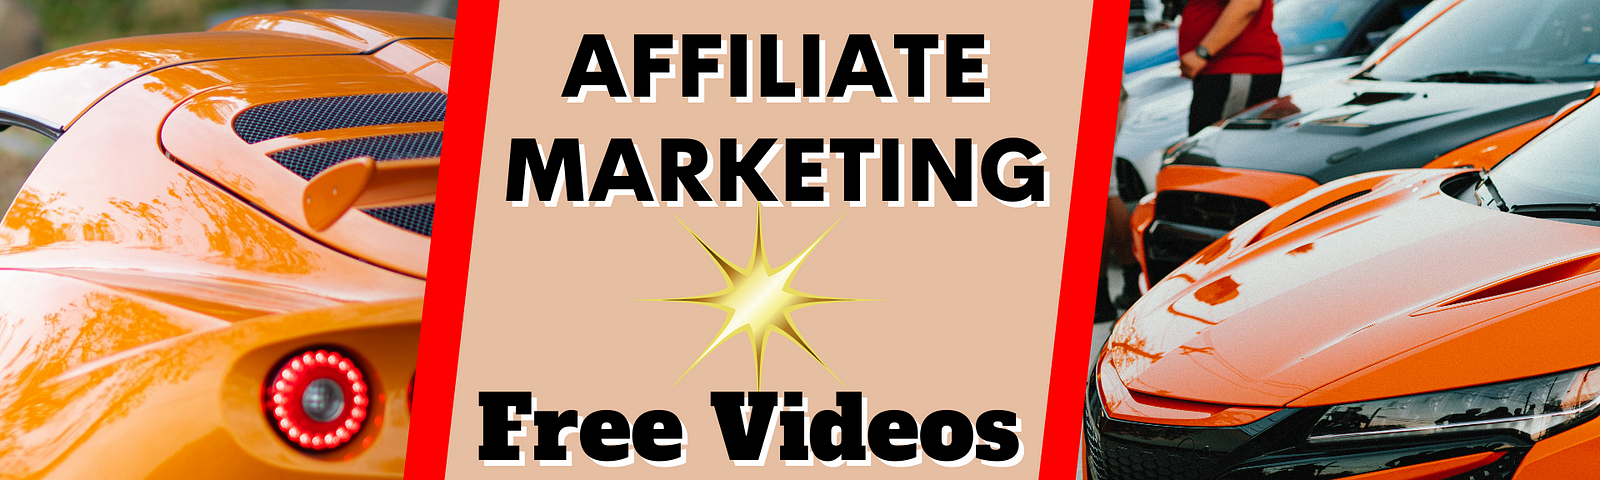 Affiliate Marketing With Free YouTube Videos Beginners Guide